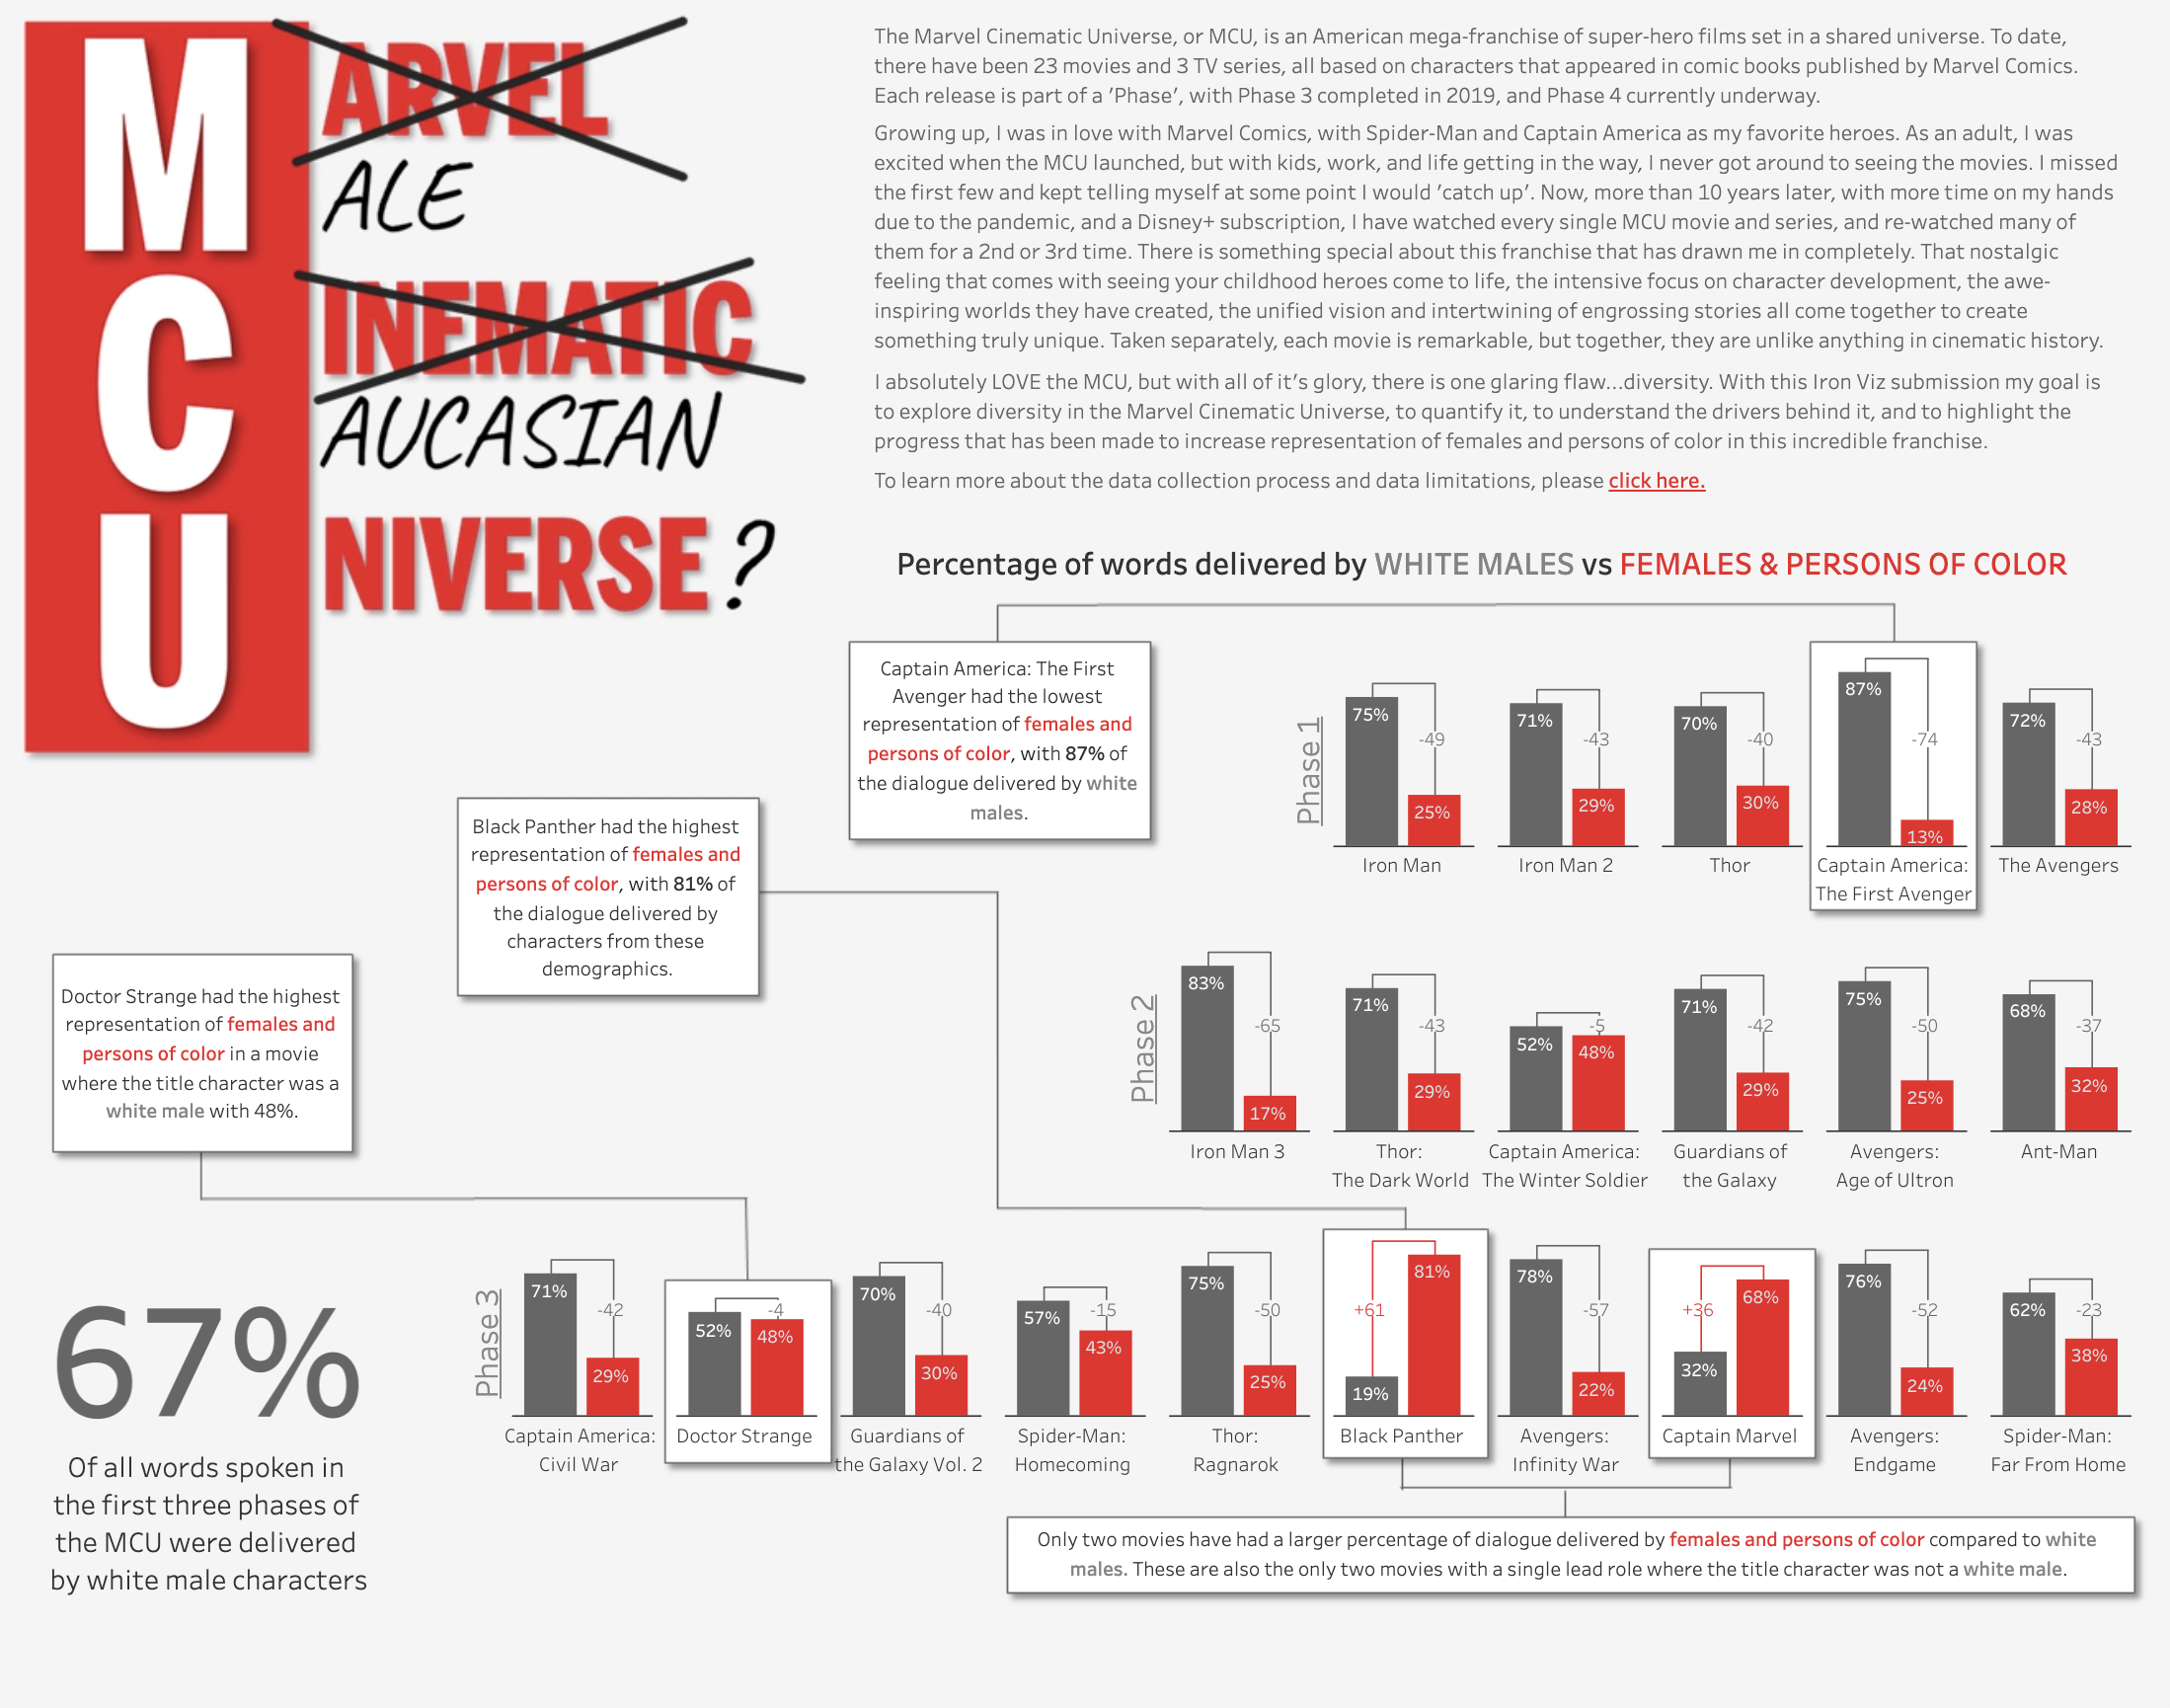 Diversity in the Marvel Cinematic Universe by Brian Moor visualization